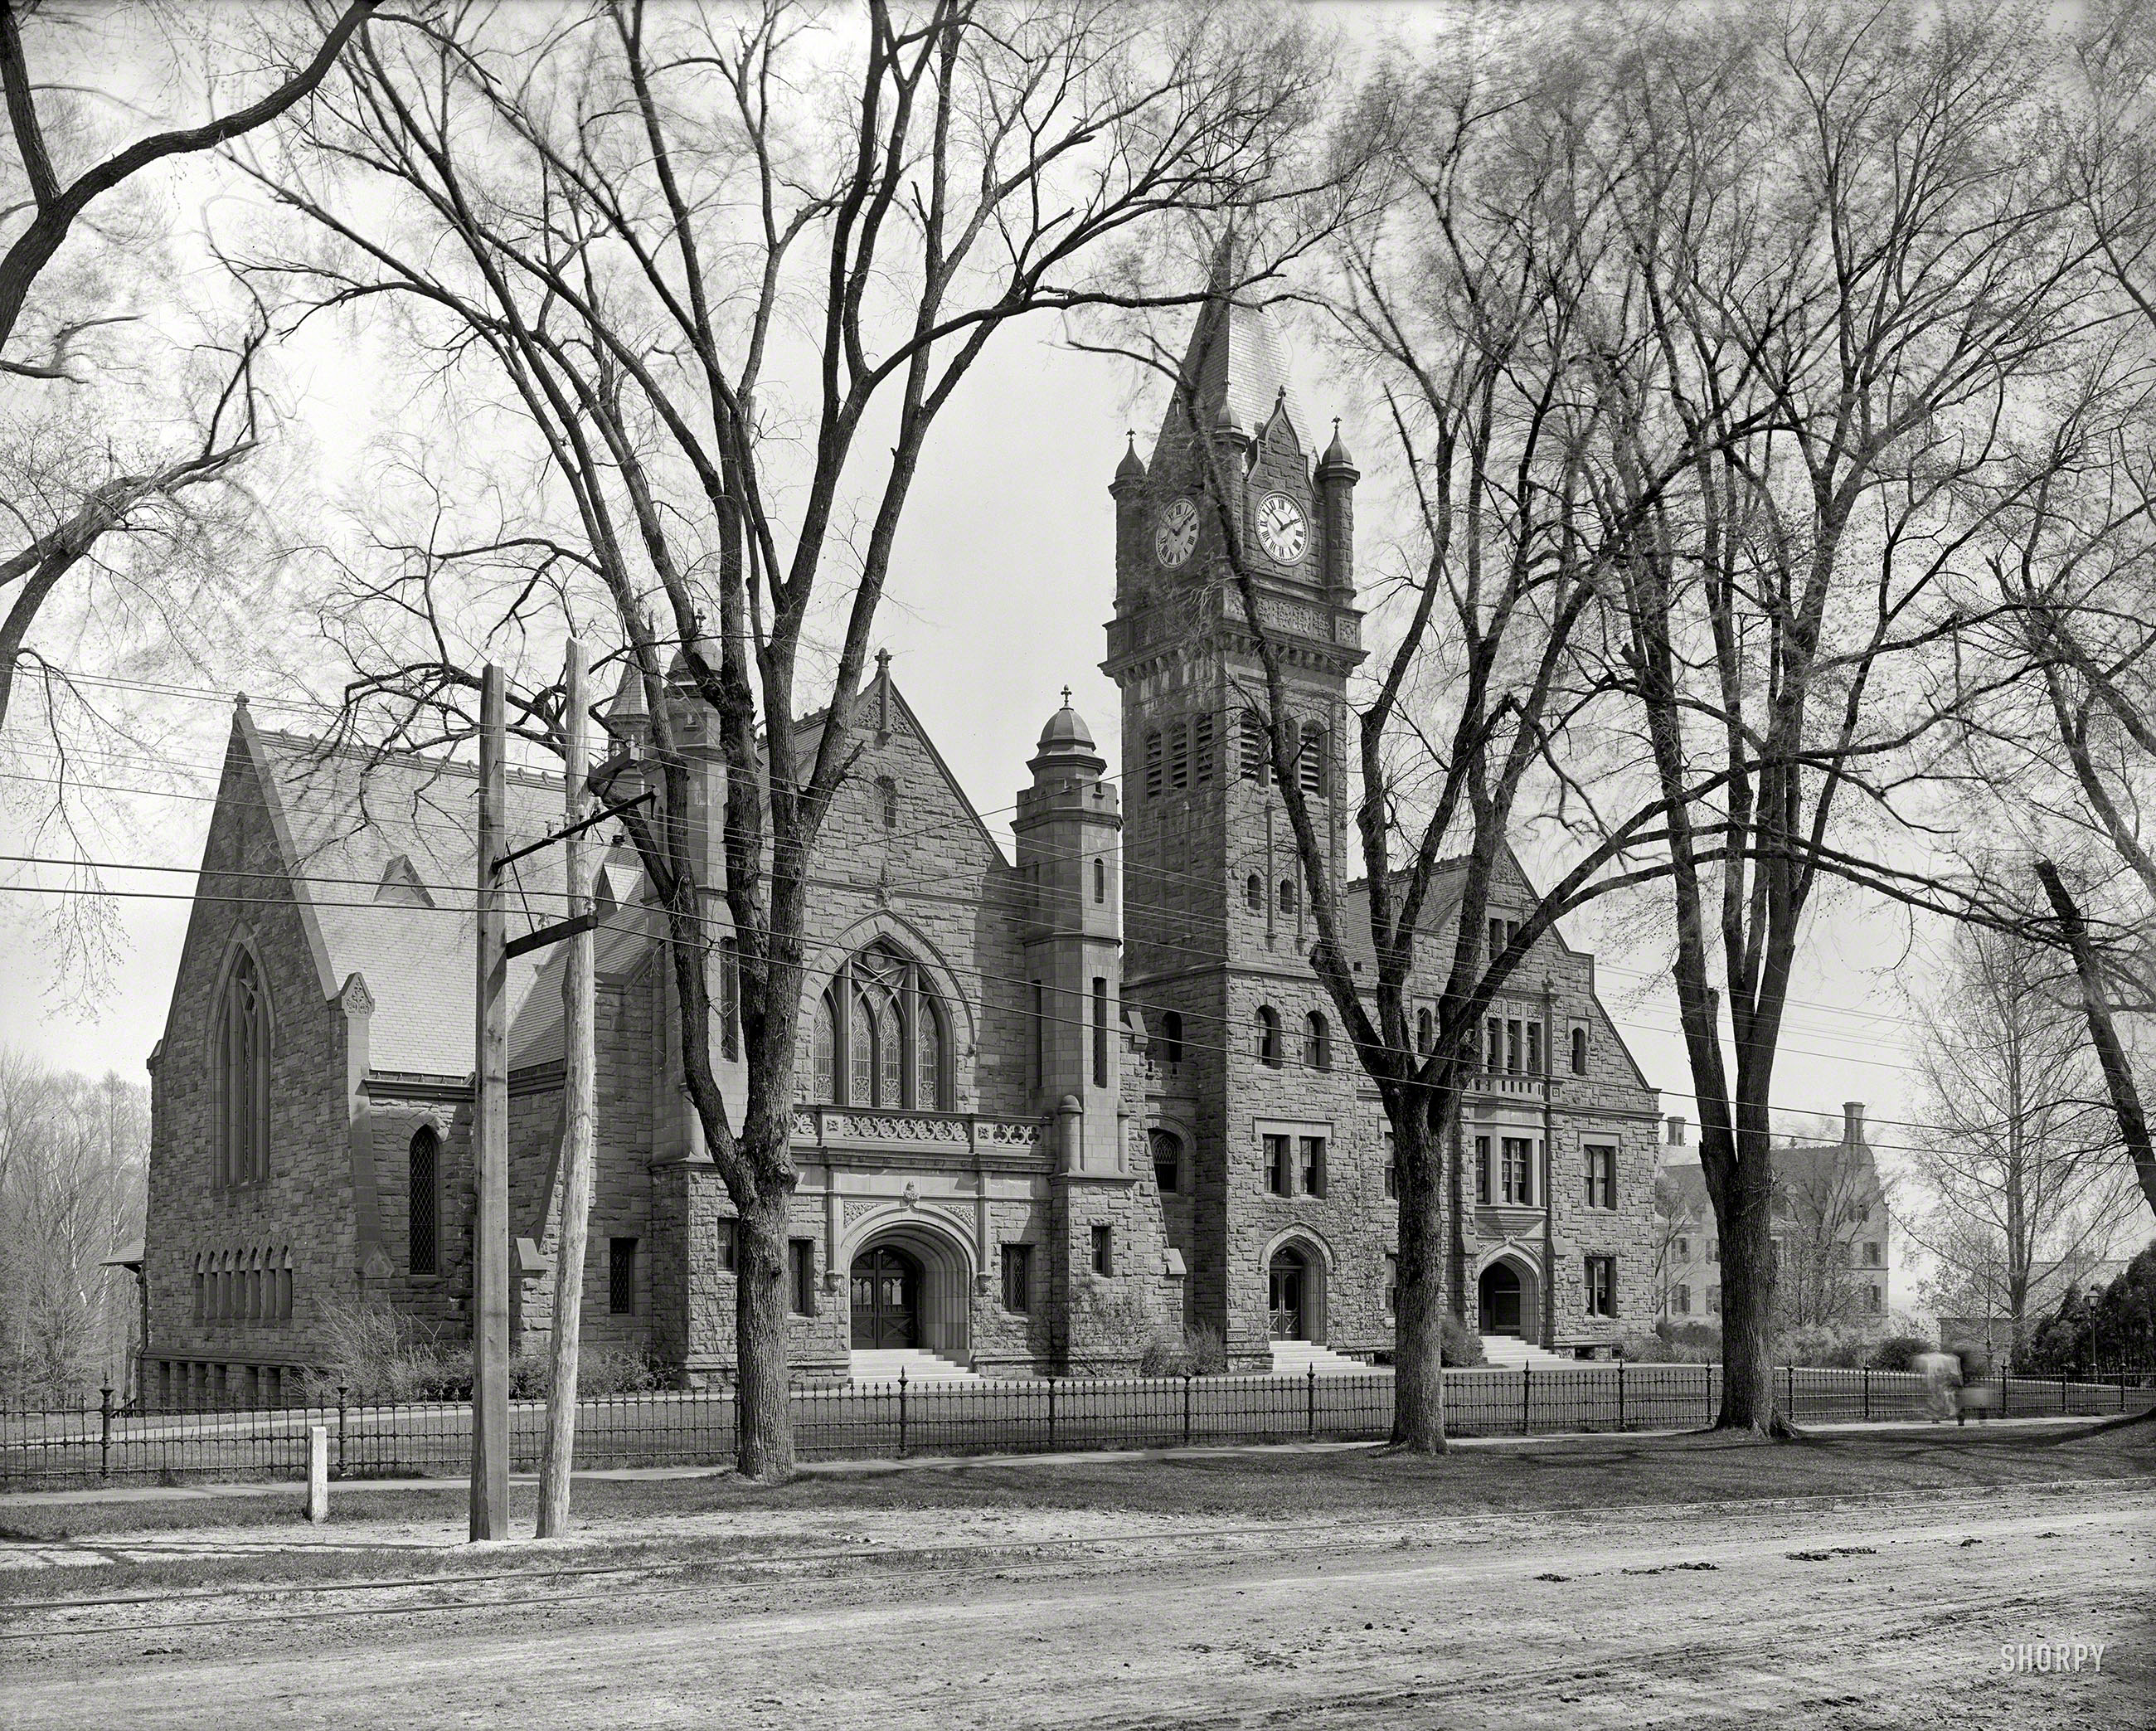 Circa 1908. "Mary Lyon Hall, Mount Holyoke College, South Hadley, Mass." One of the half-dozen or so campus buildings at American colleges that are named after the 19th-century educator. Detroit Publishing glass negative. View full size.